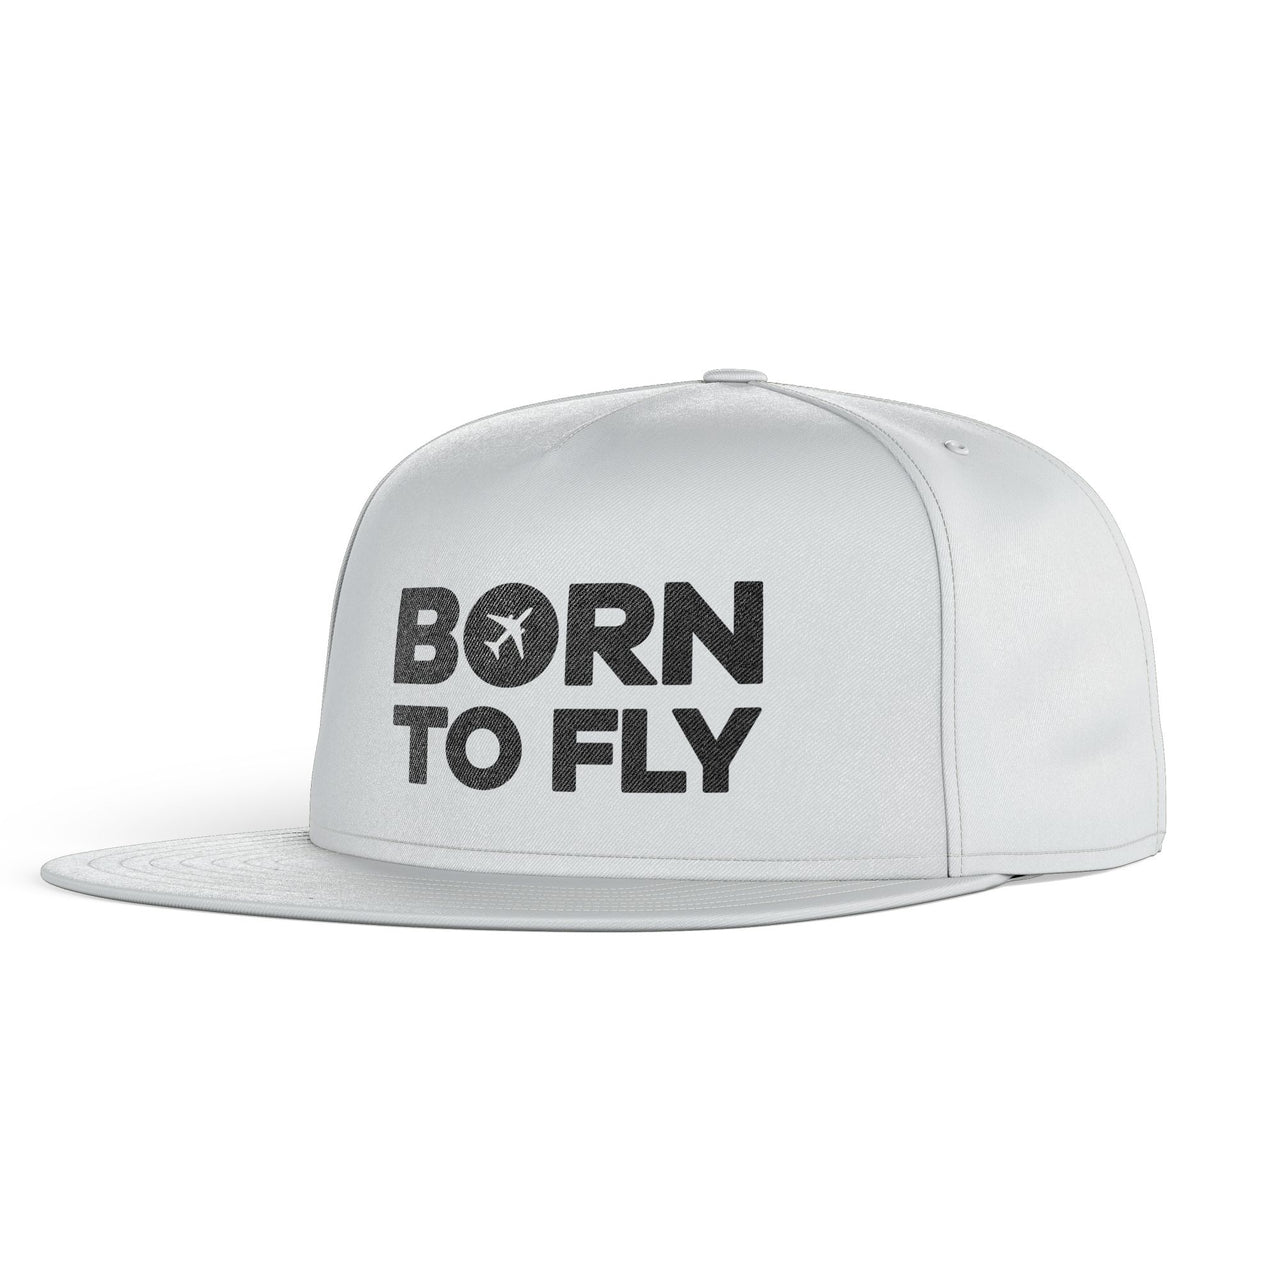 Born To Fly Special Designed Snapback Caps & Hats